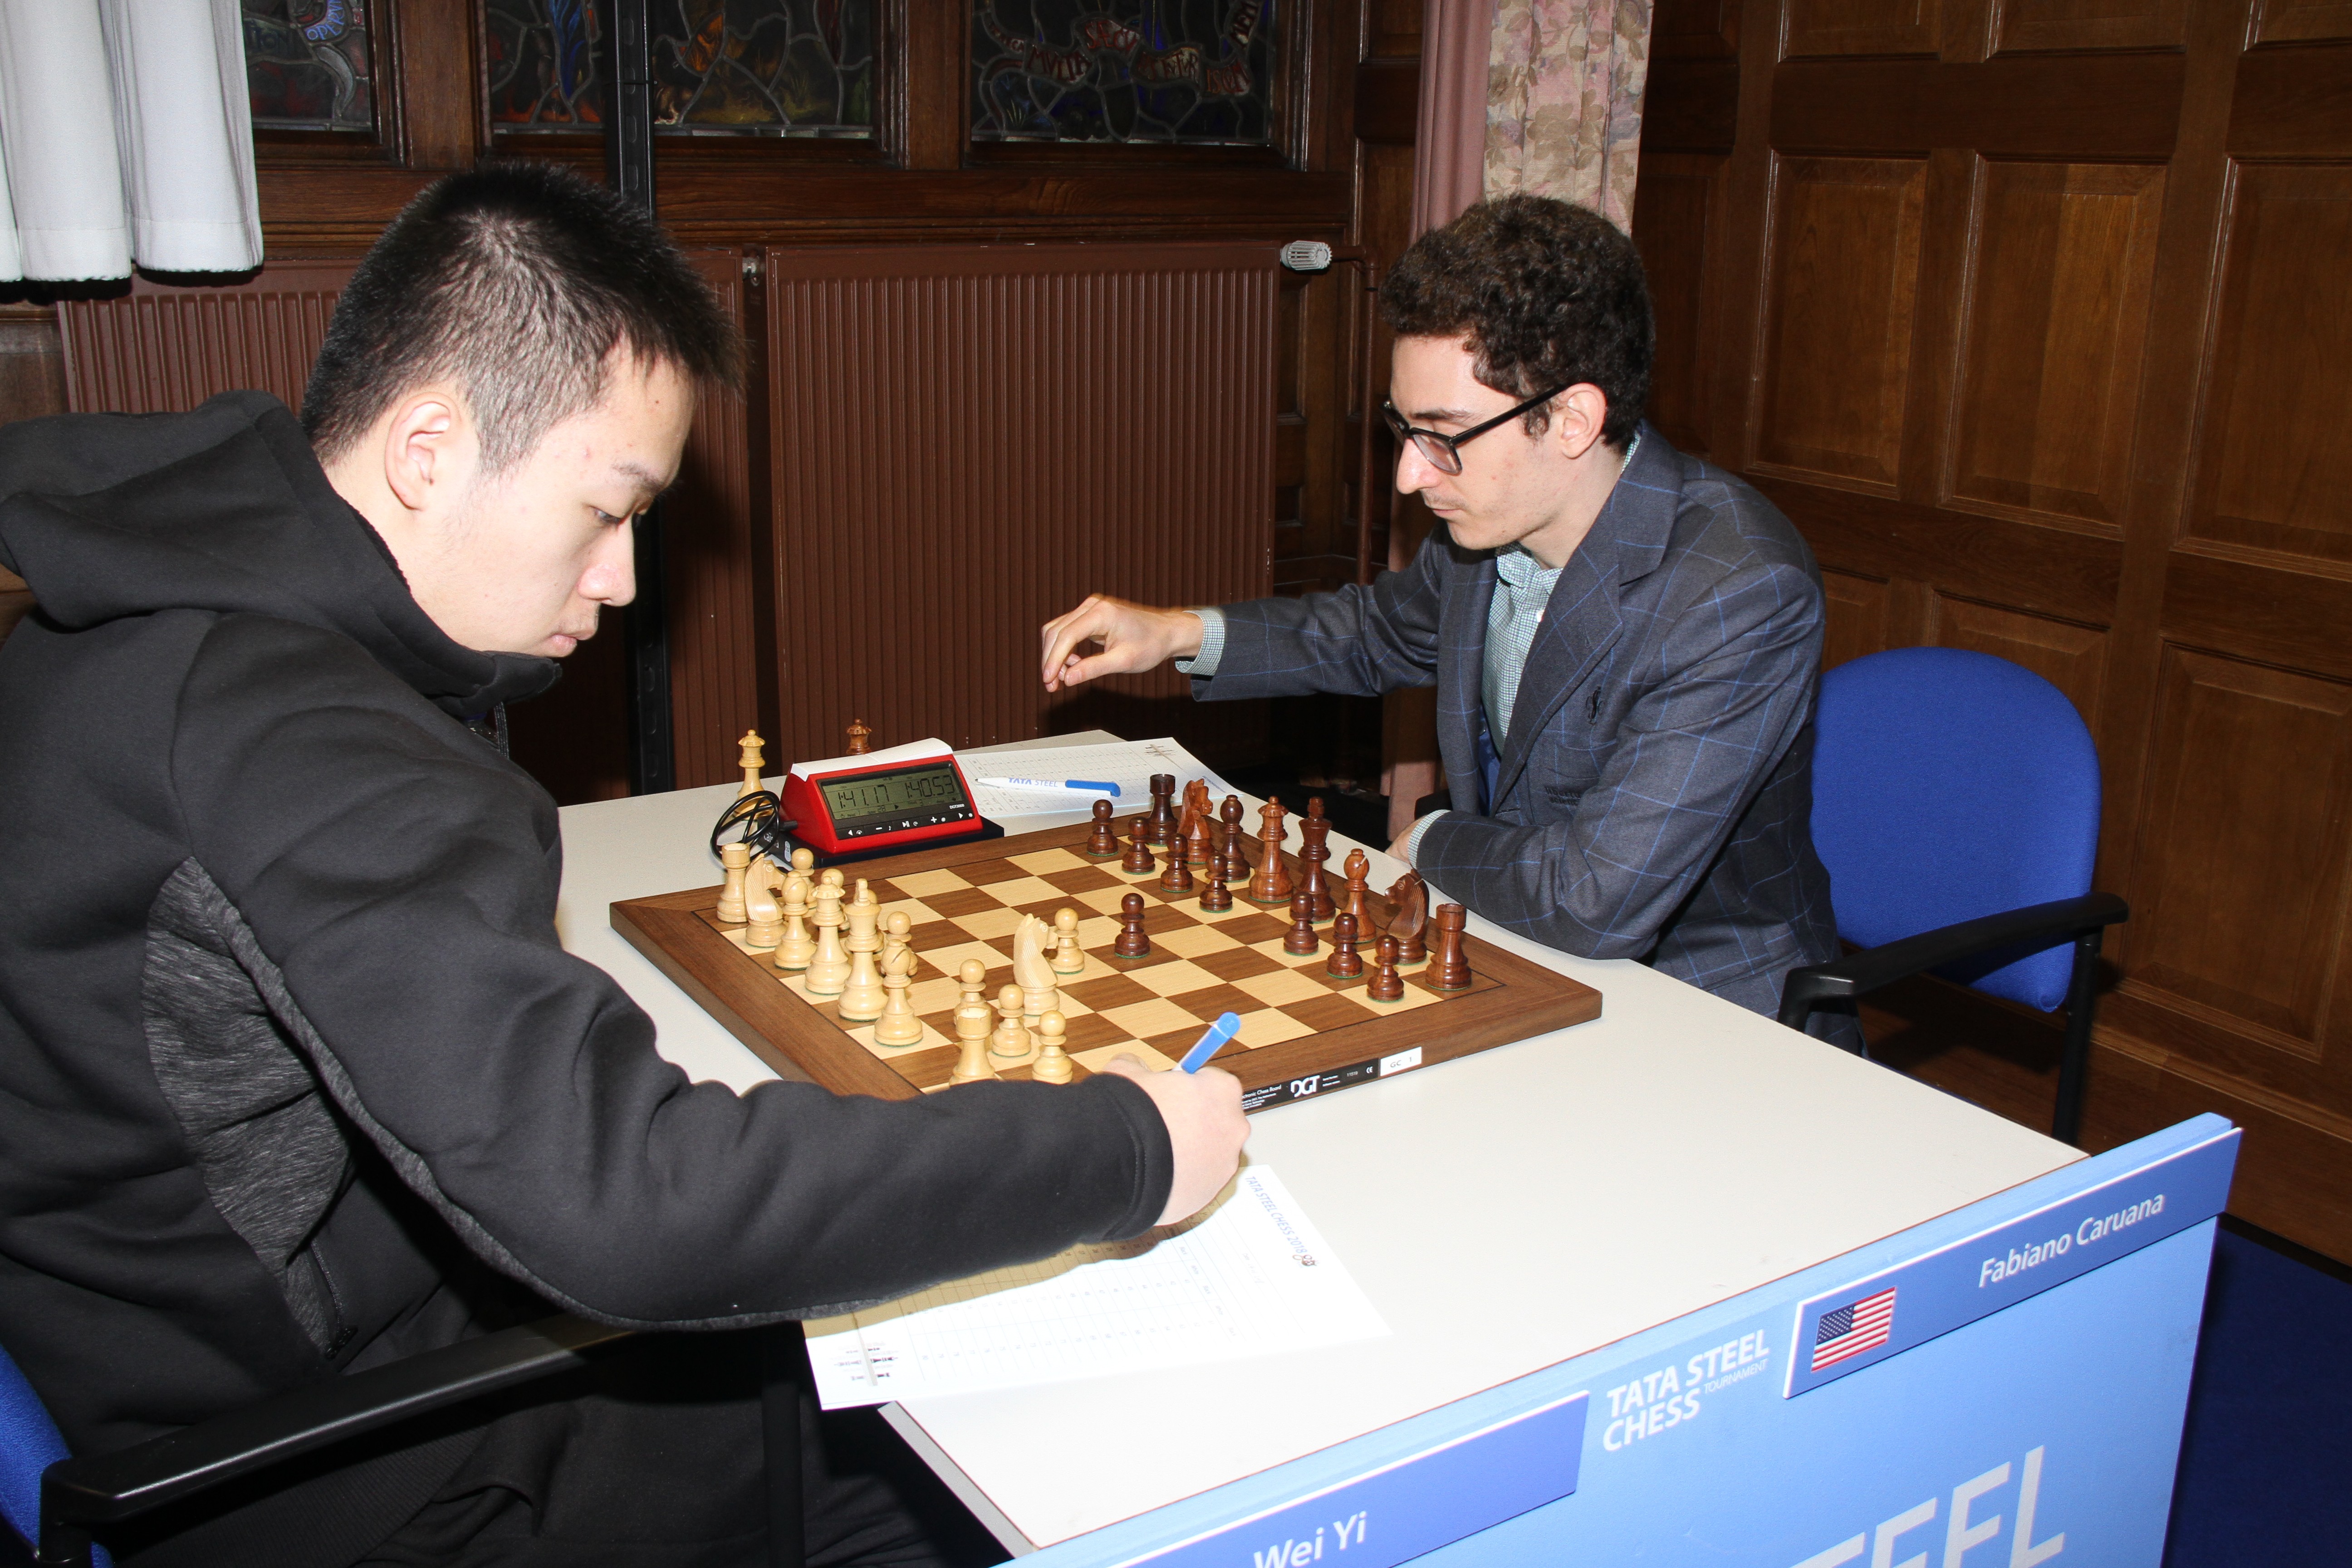 Playing With Computer Like Precision! Fabiano Caruana vs Wesley So. 2023  Sinquefield Cup. Round 7. 